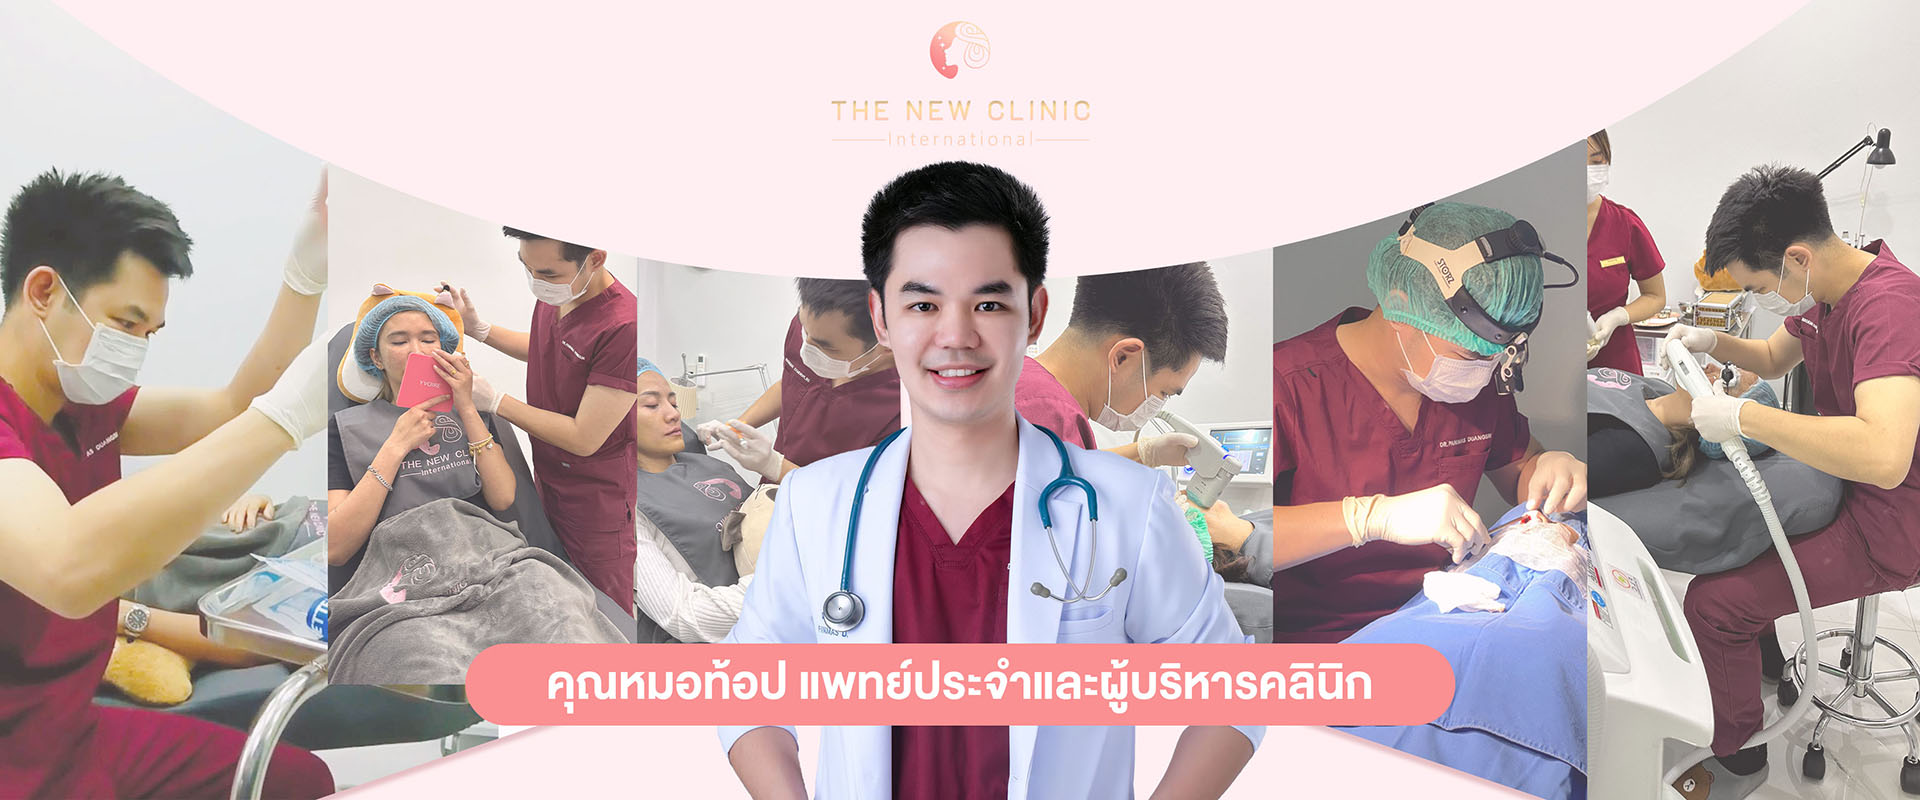 Graphic Website 2-5 - The New Clinic International - มินิมอล